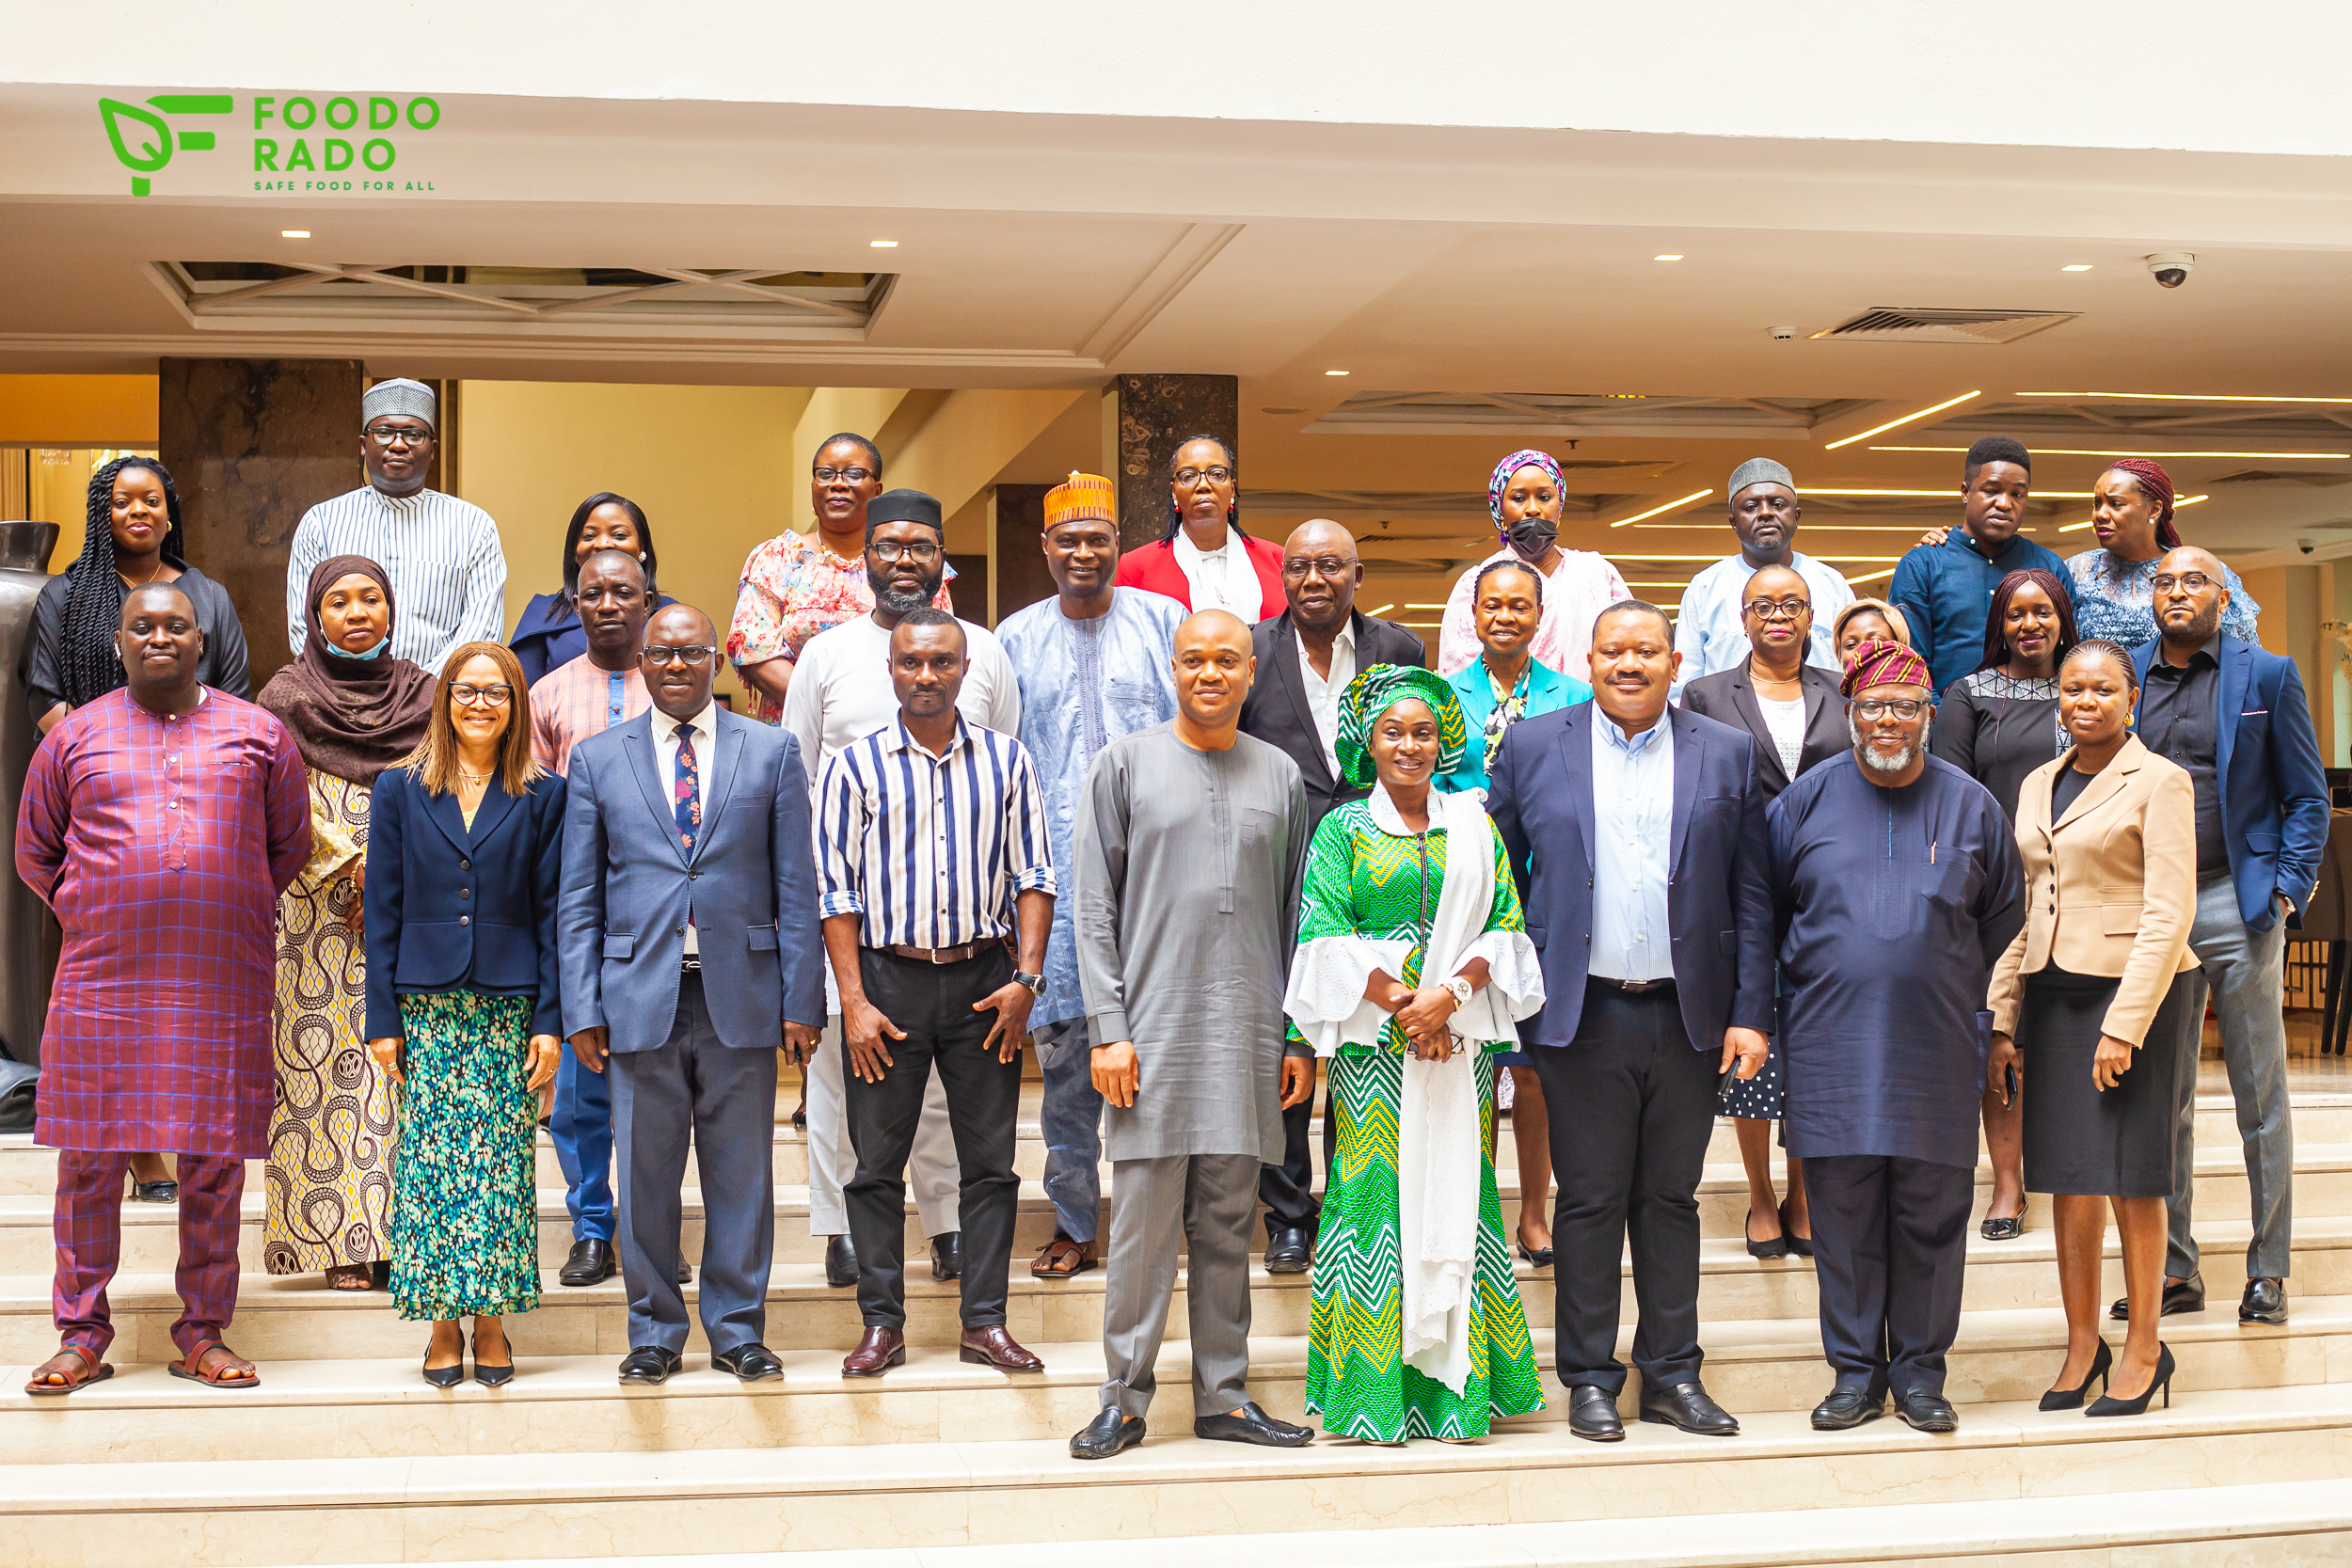 NESG holds Expert Forum on Food Safety,The Nigerian Economic Summit Group, The NESG, think-tank, think, tank, nigeria, policy, nesg, africa, number one think in africa, best think in nigeria, the best think tank in africa, top 10 think tanks in nigeria, think tank nigeria, economy, business, PPD, public, private, dialogue, Nigeria, Nigeria PPD, NIGERIA, PPD, The Nigerian Economic Summit Group